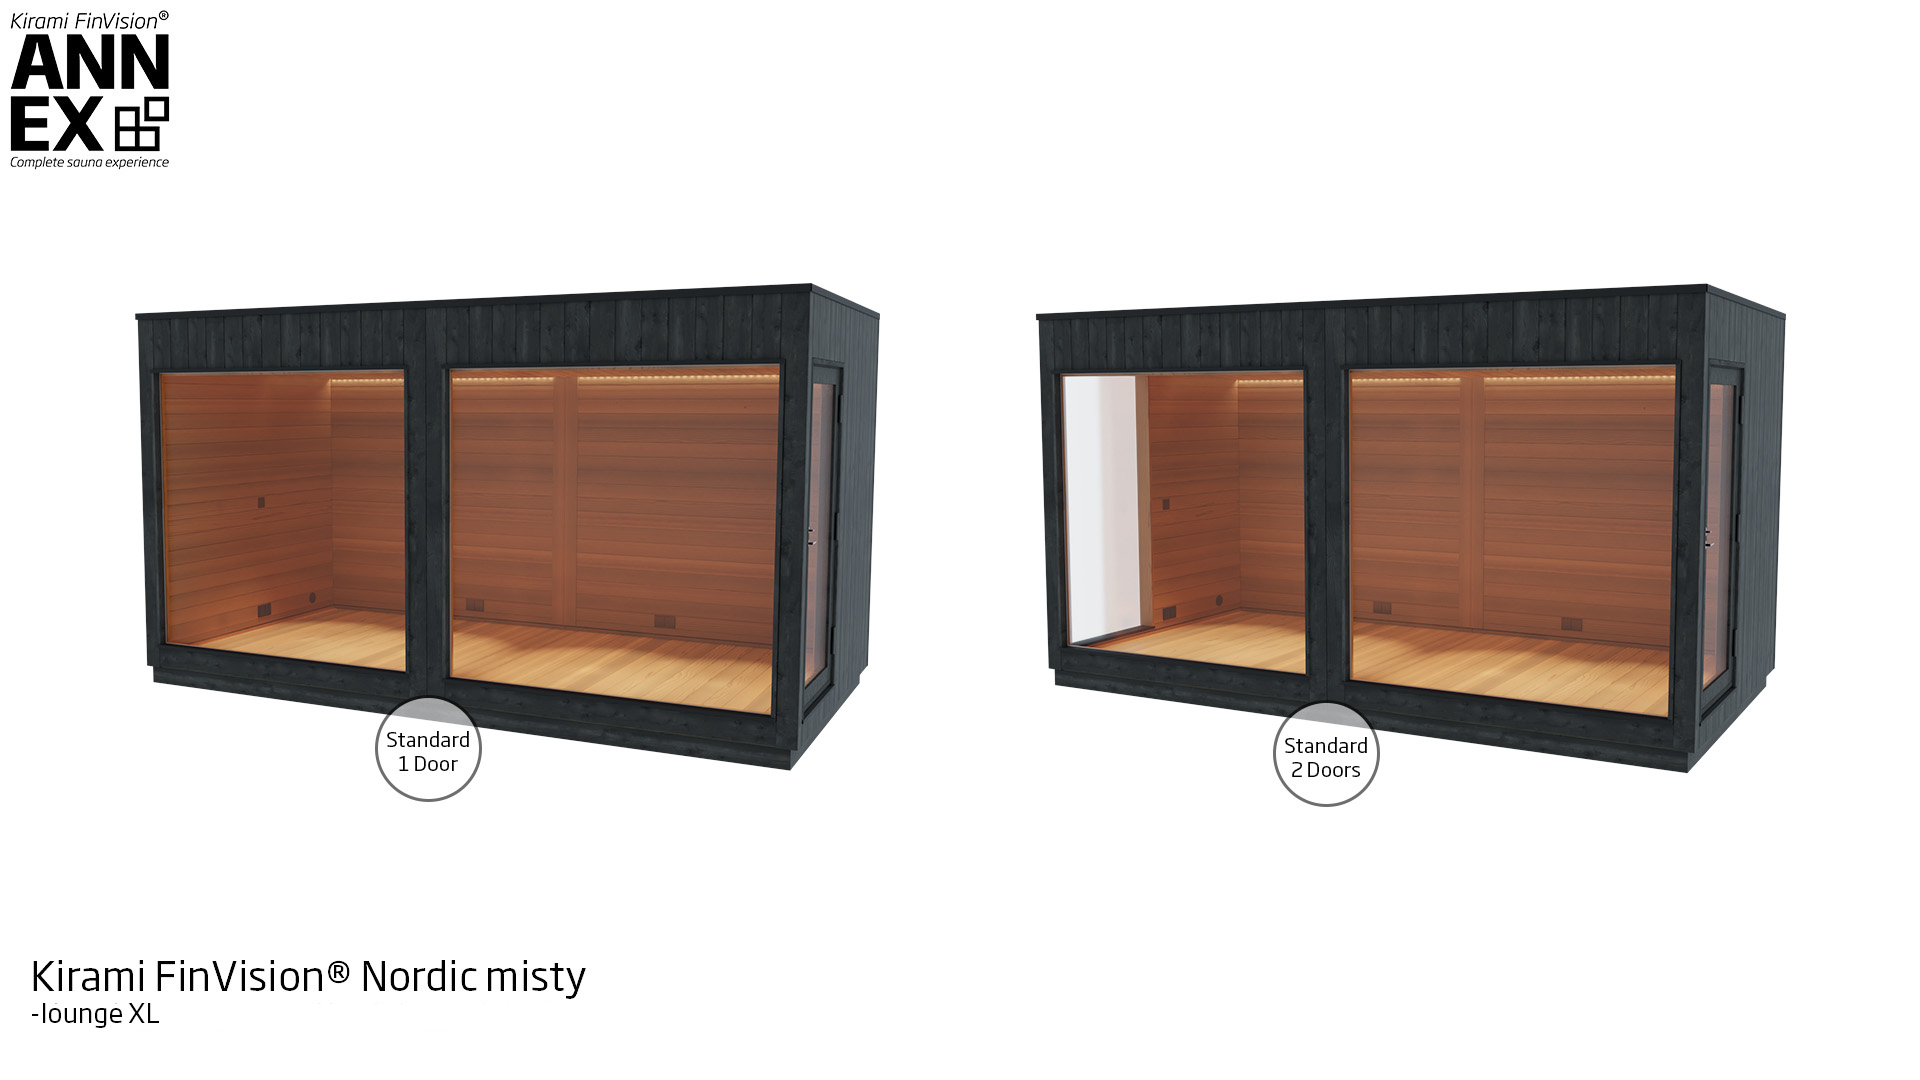 Kirami FinVision® -lounge XL Nordic misty with standard 1 door, standard 2 door | Kirami FinVision® Annex